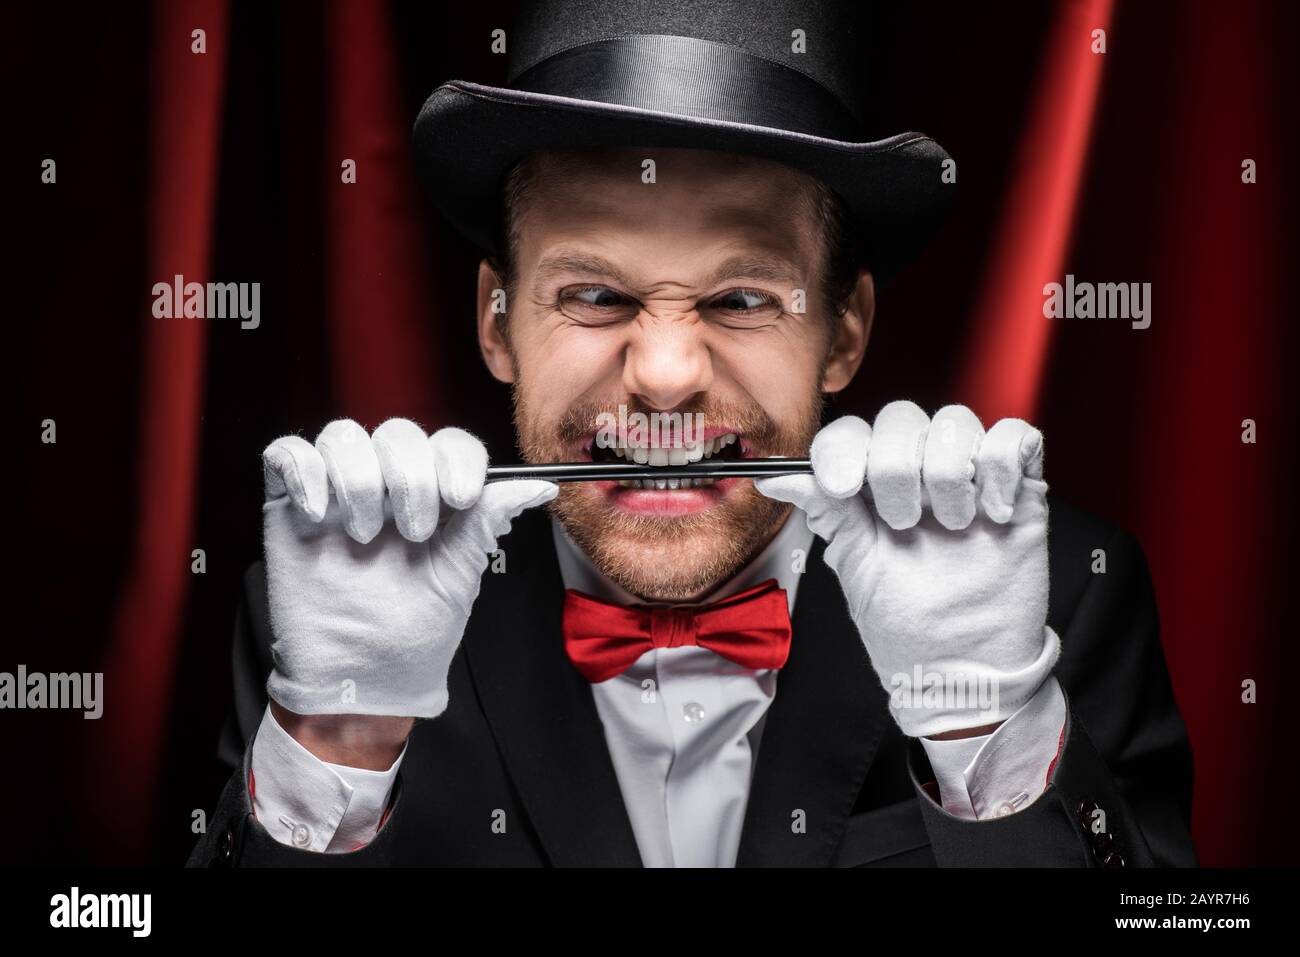 emotional scary magician in suit and hat holding wand in teeth in circus with red curtains Stock Photo